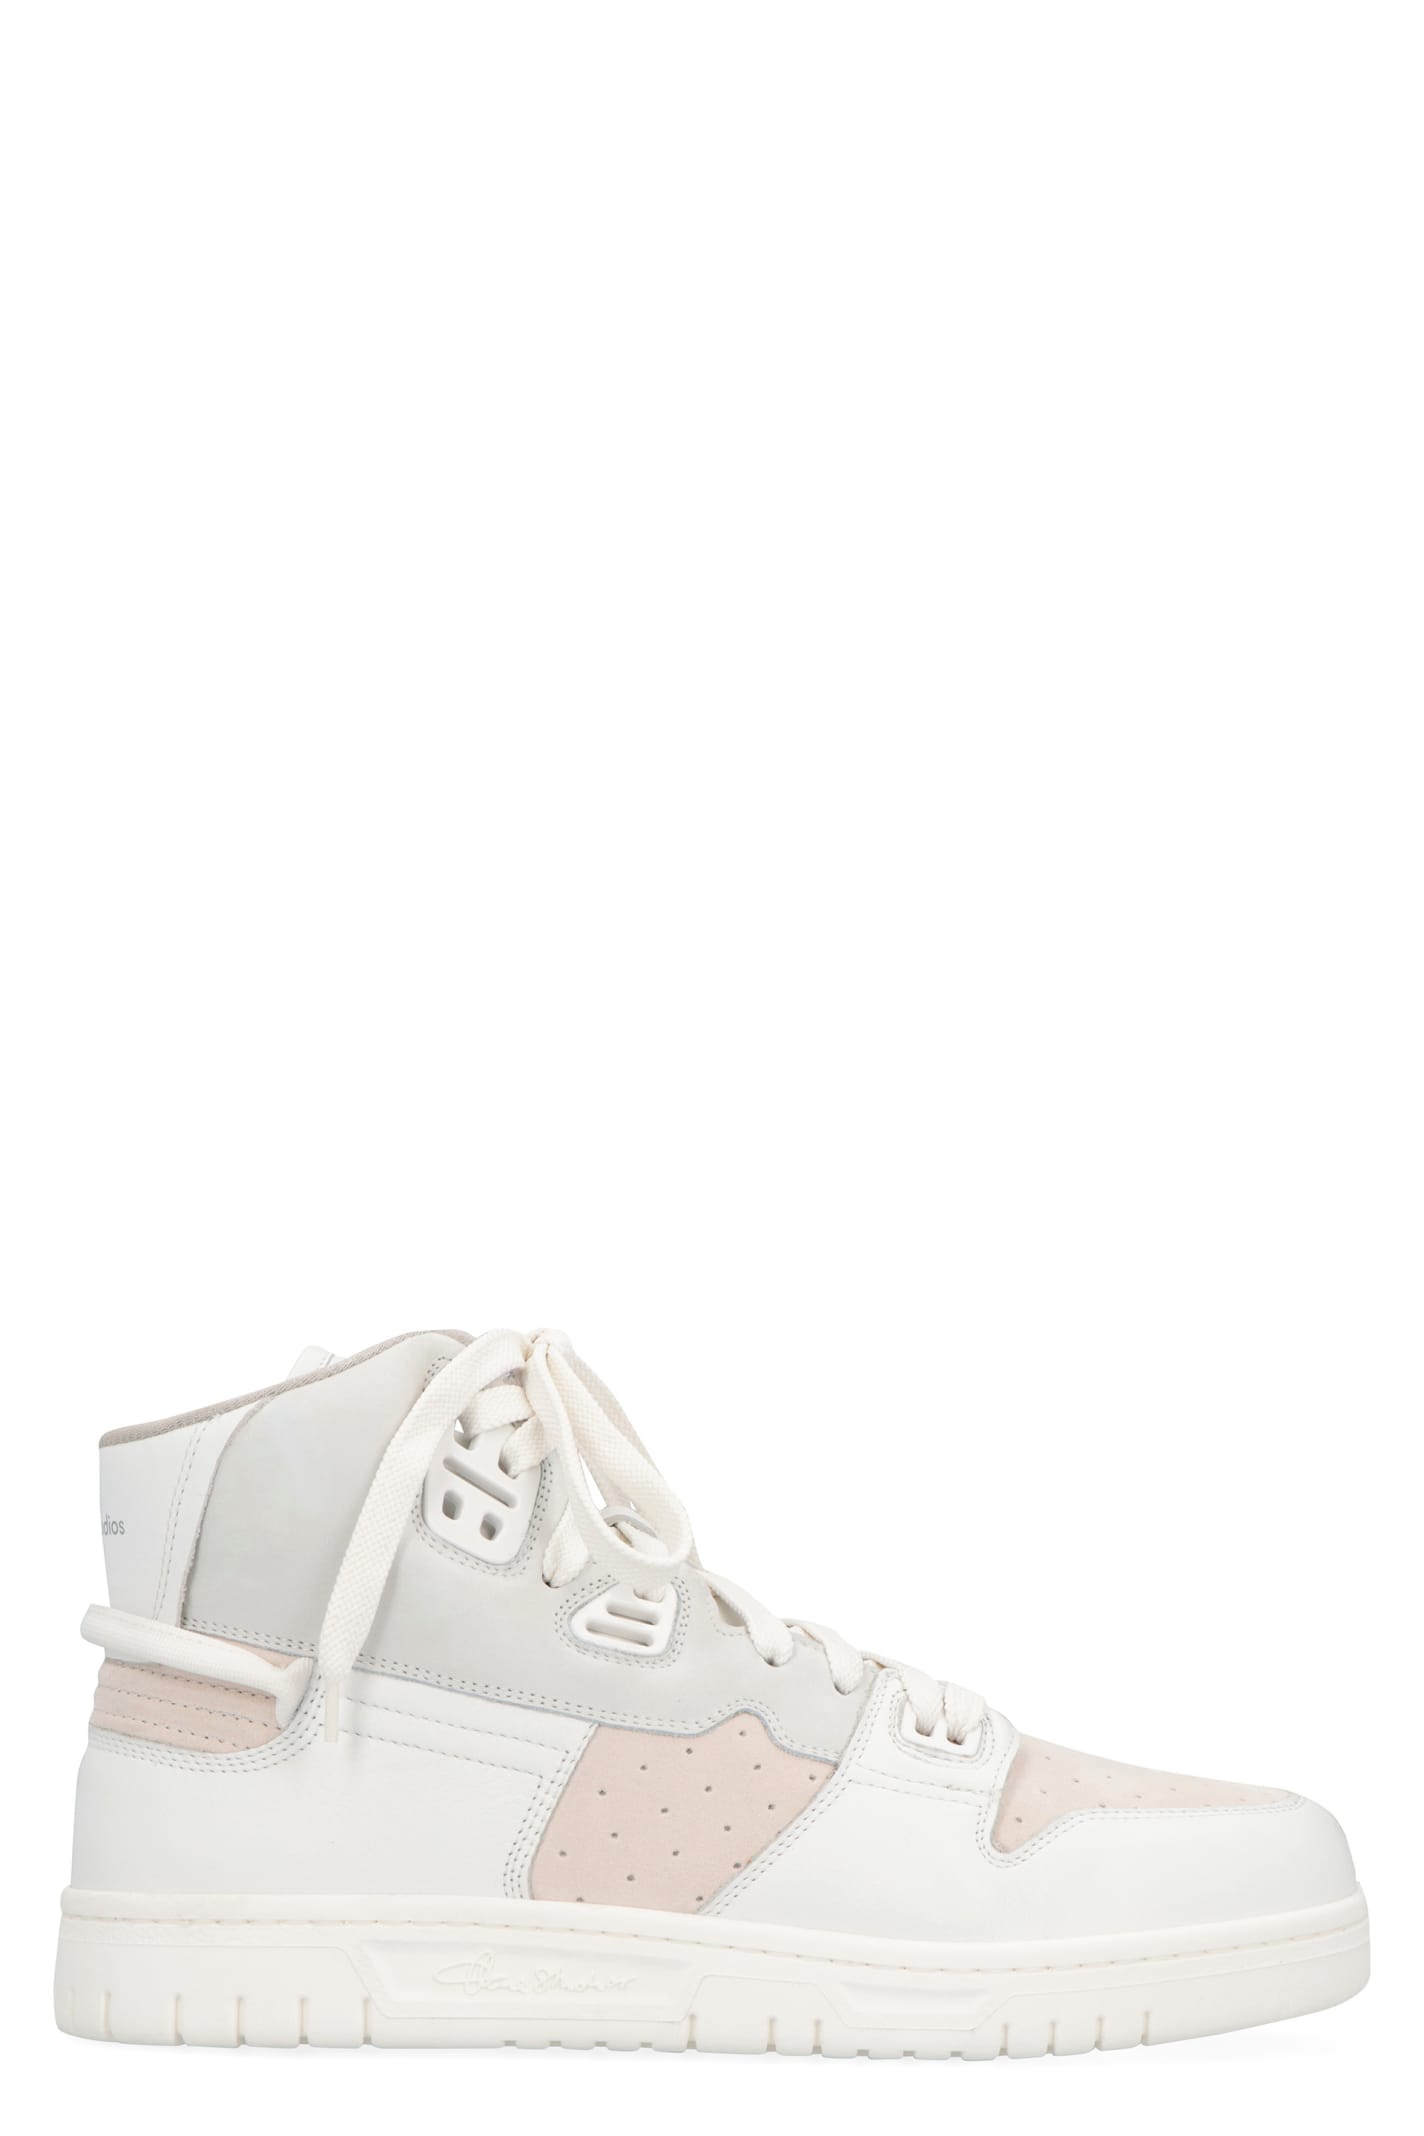 Acne Studios Leather High-top Sneakers